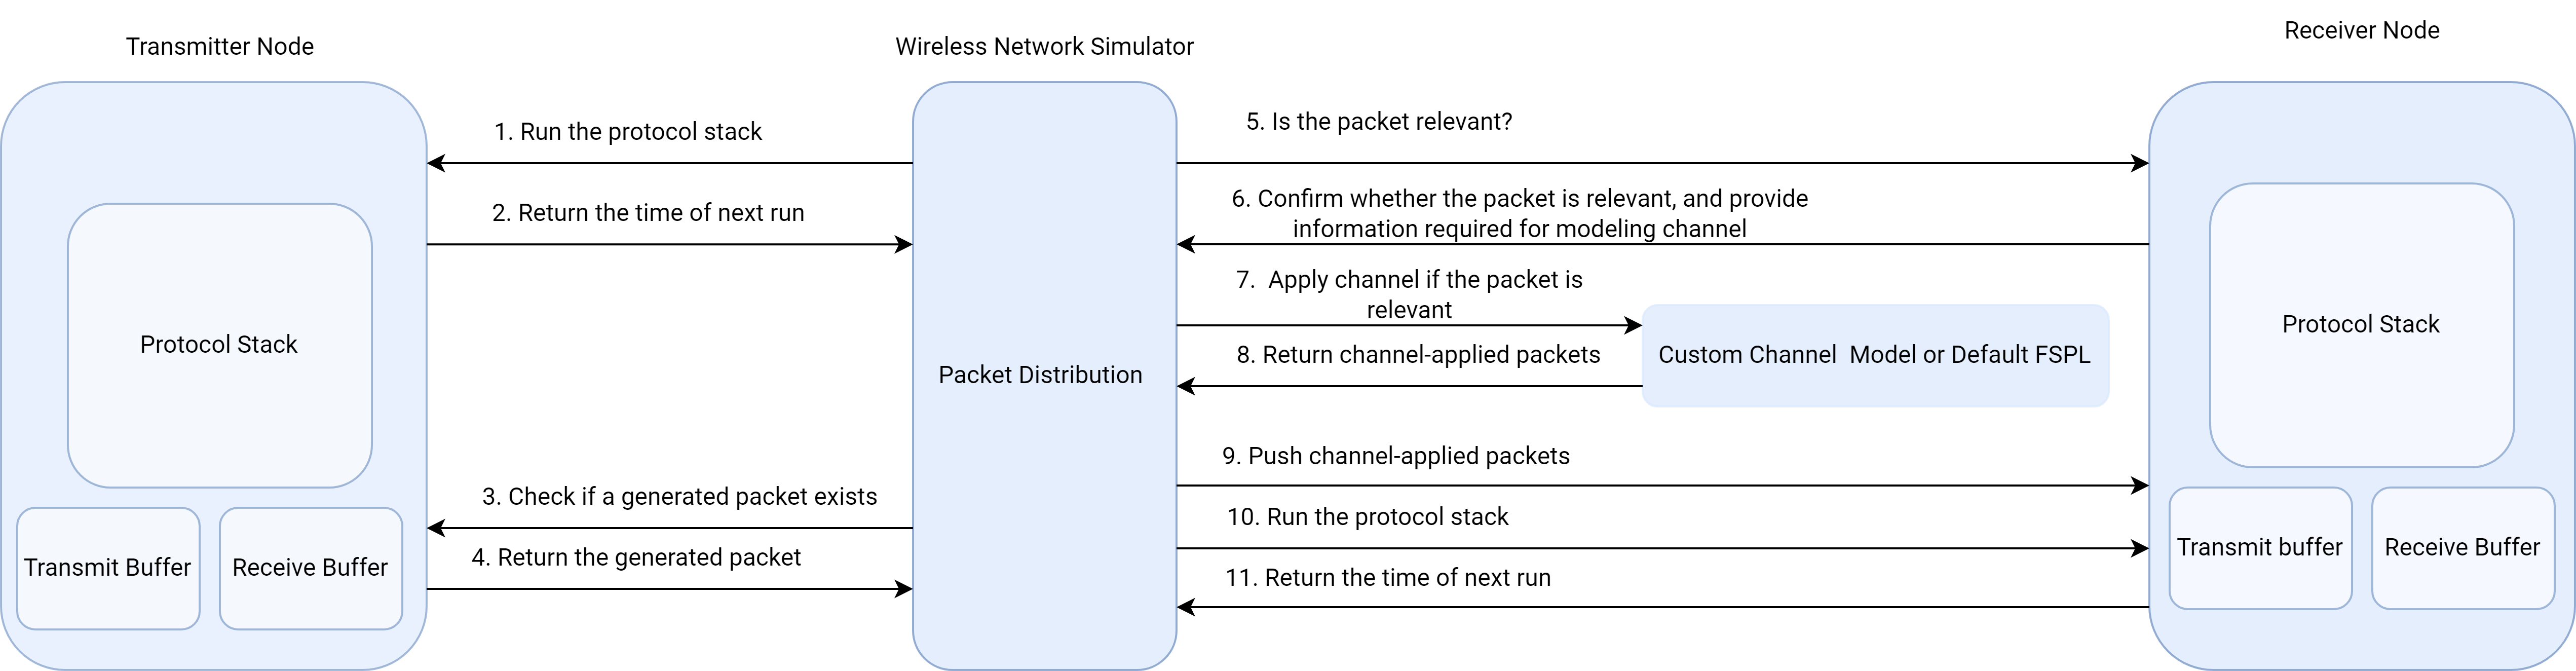 Interaction between the Network Simulator and the Wireless Nodes